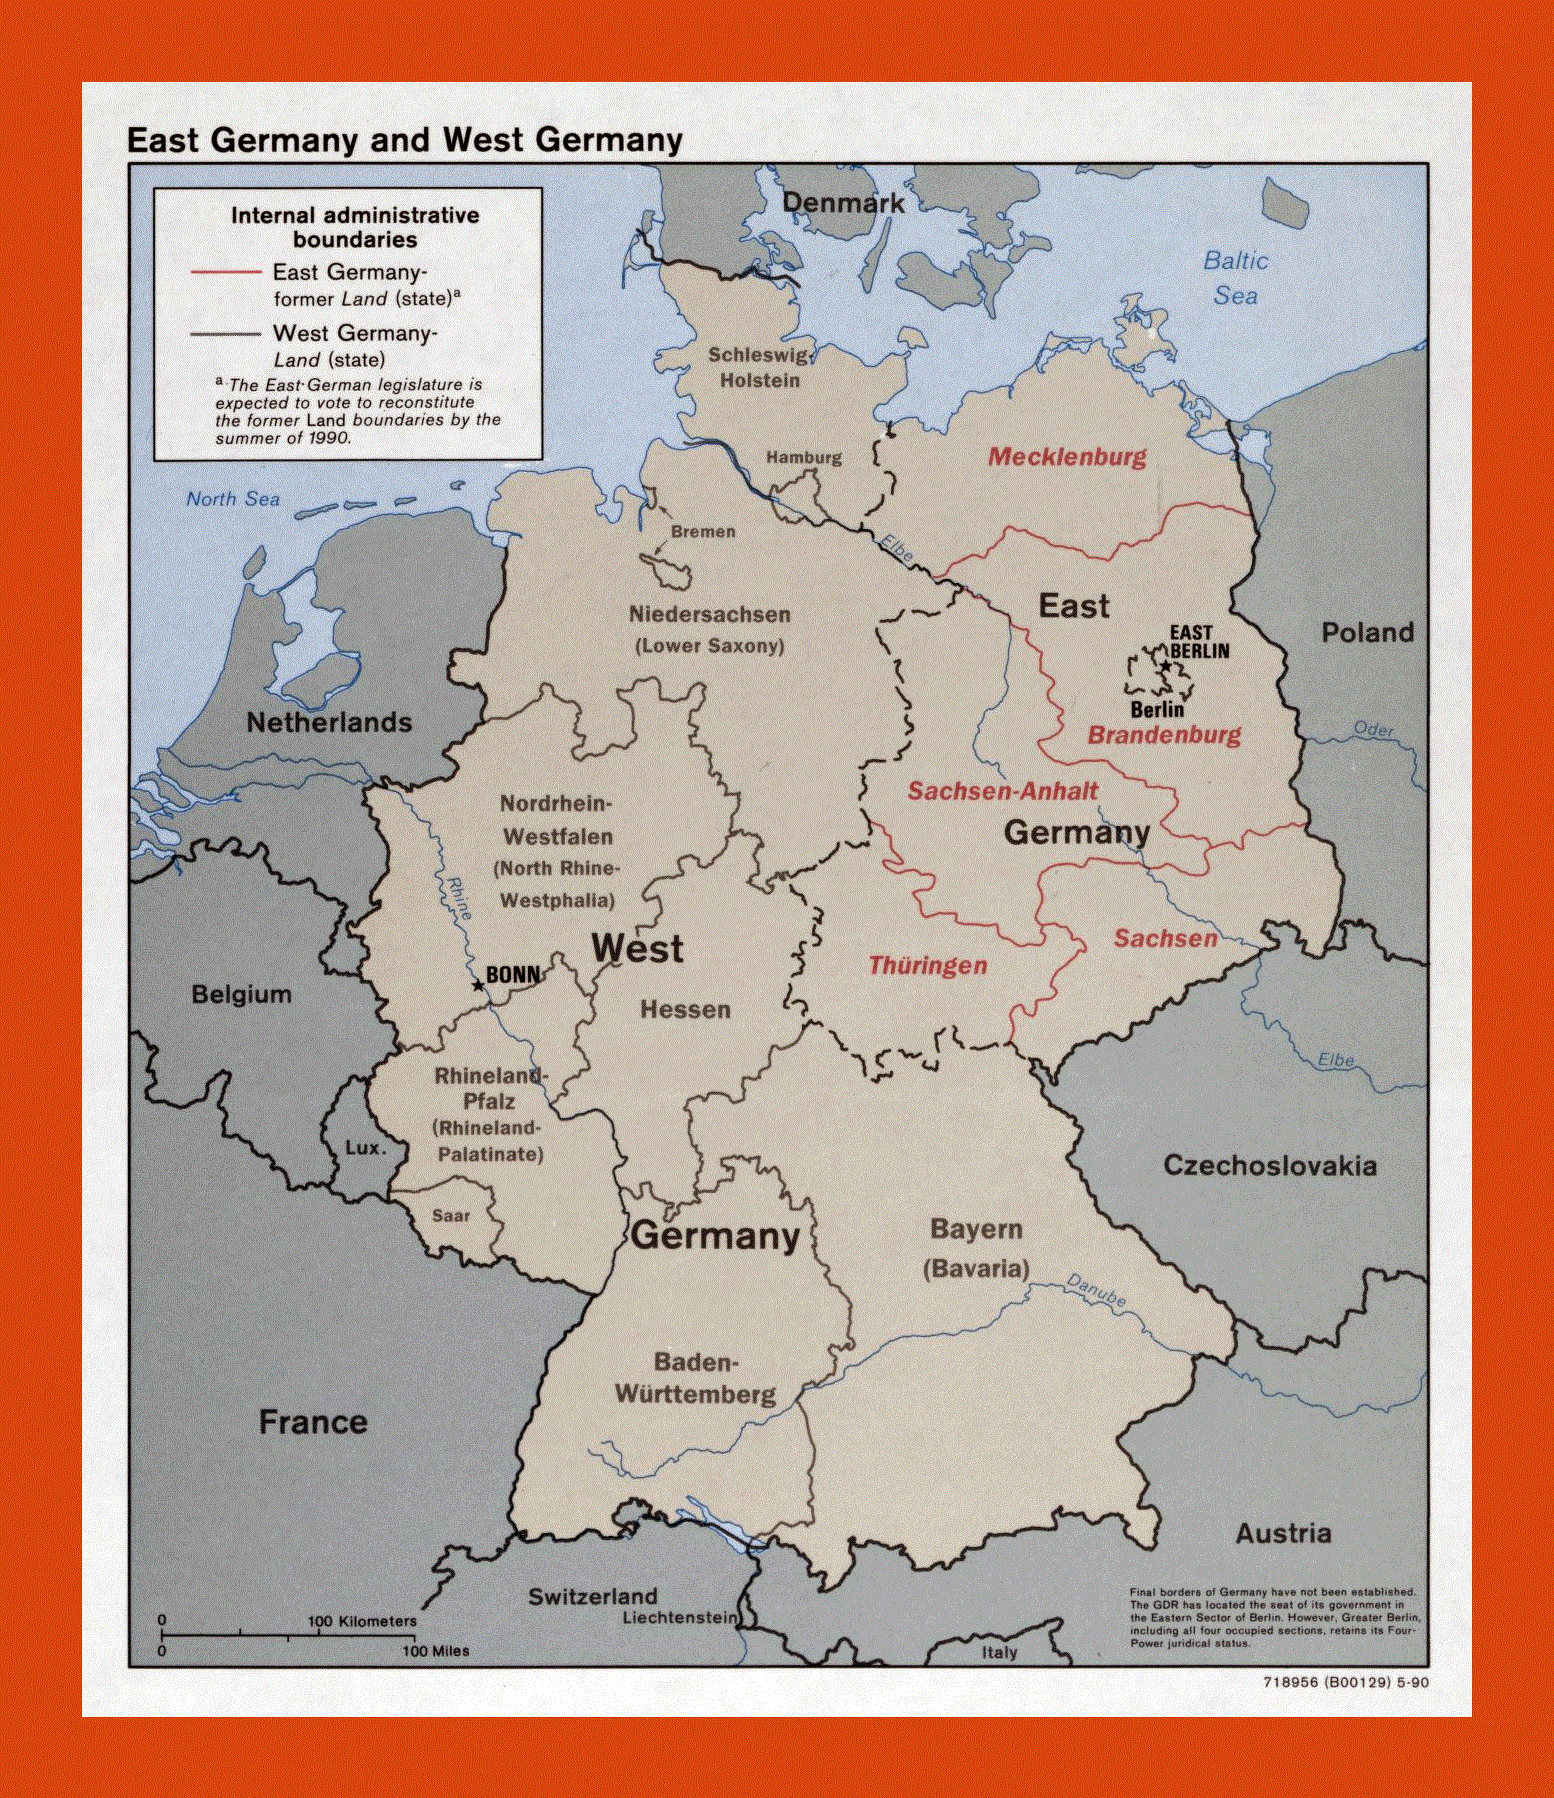 Political And Administrative Map Of East Germany And West Germany 1990 Maps Of Germany Maps Of Europe Gif Map Maps Of The World In Gif Format Maps Of The Whole World